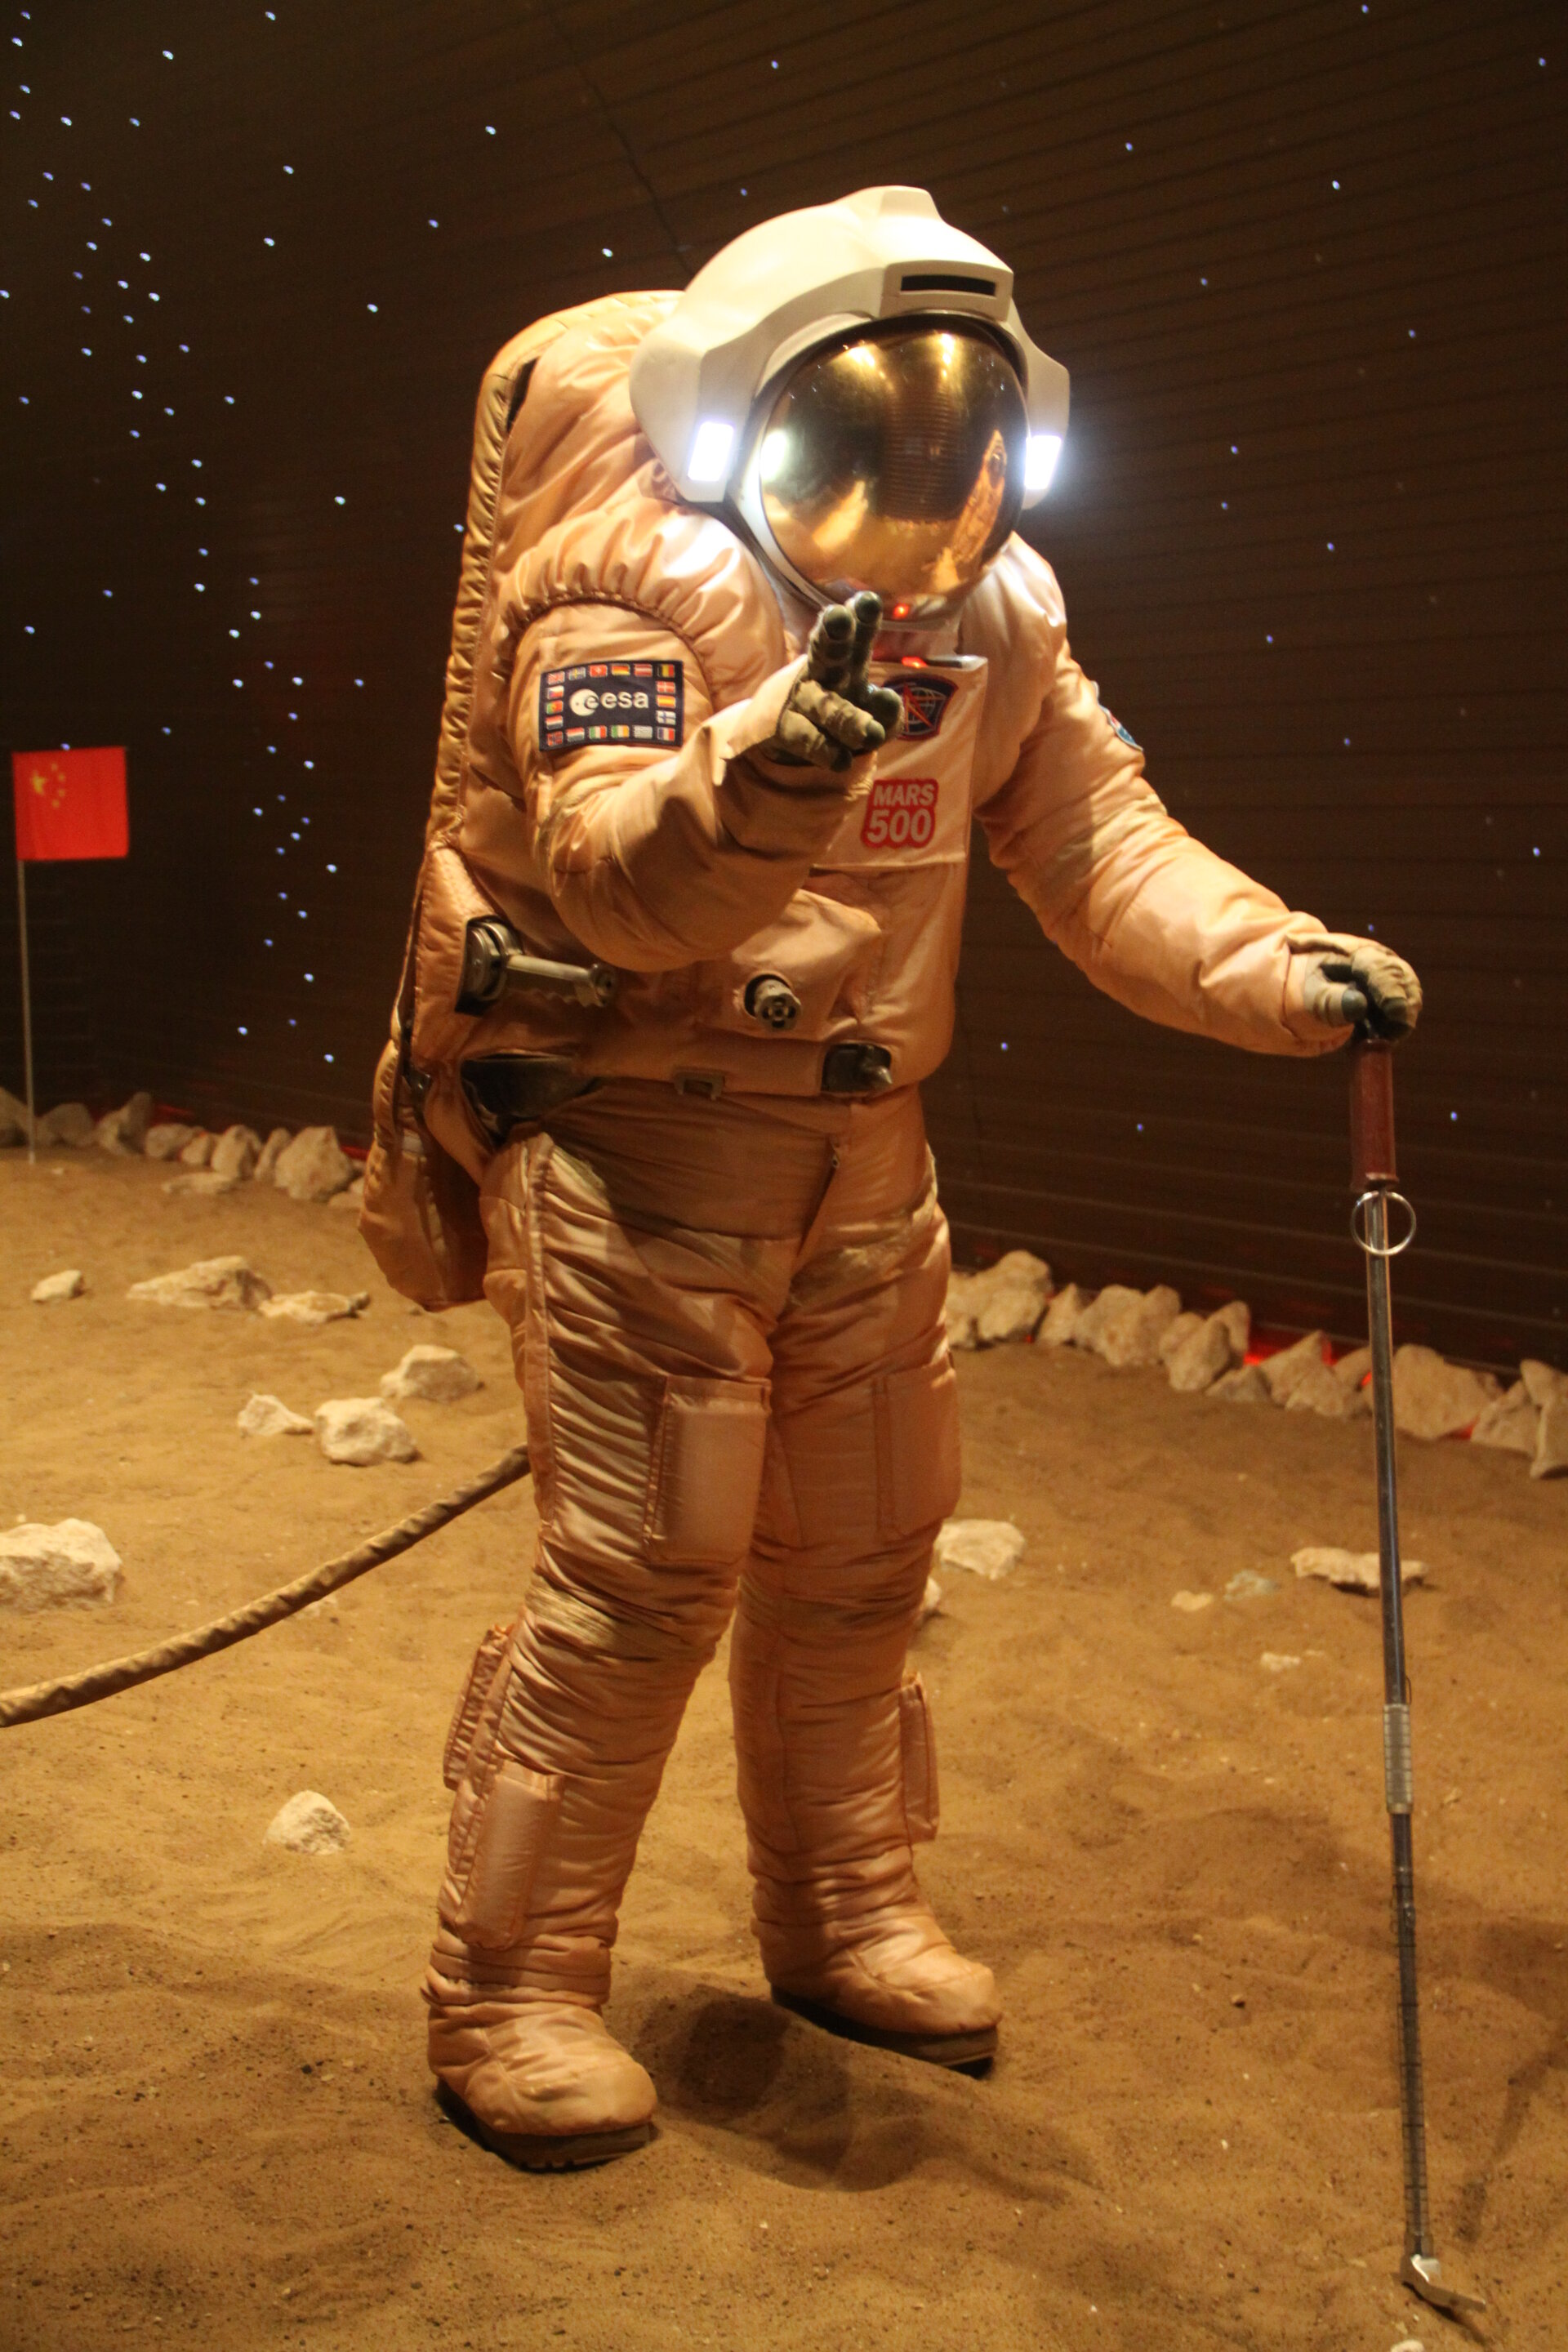 The secrets of the spectacular spacesuit